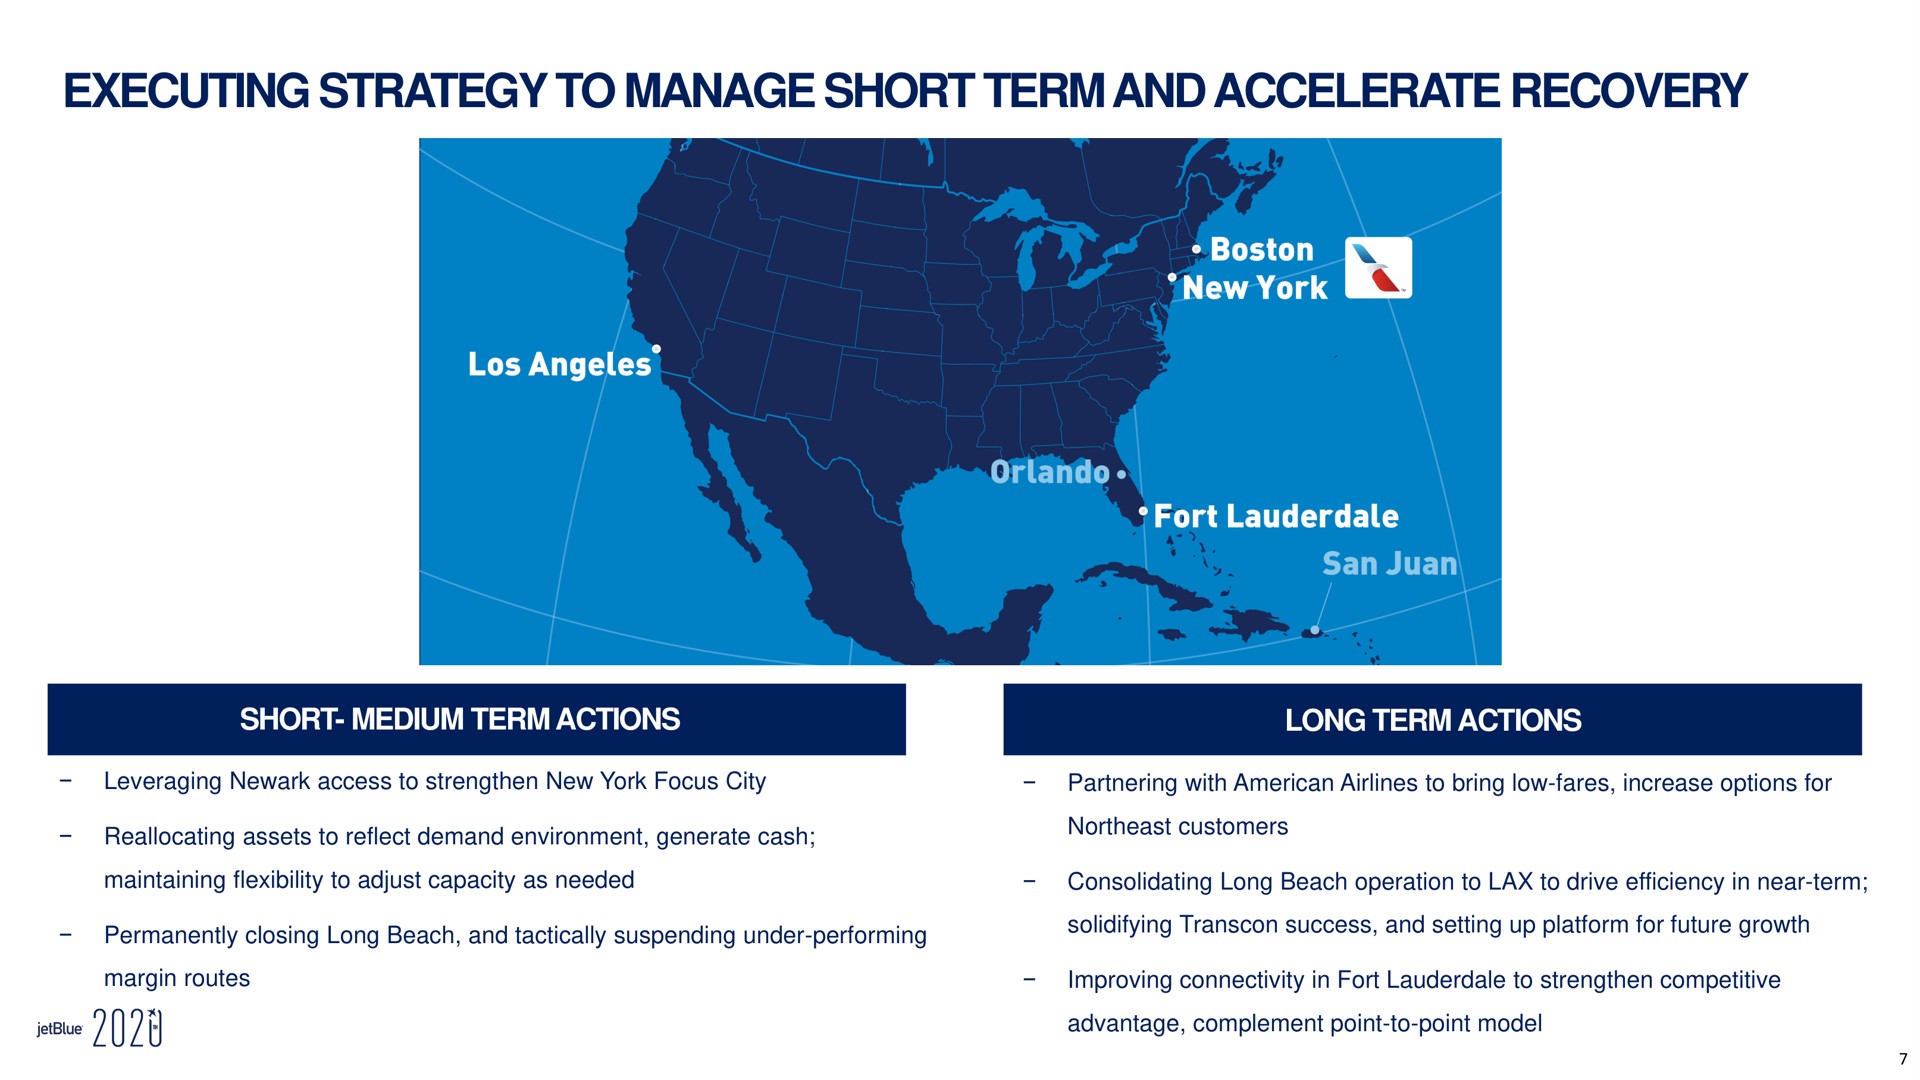 executing strategy to manage short term and accelerate recovery short medium term actions long term actions ace tye an fort san reallocating assets reflect demand environment generate cash northeast customers permanently closing beach tactically suspending under performing solidifying success setting up platform for future growth | jetBlue